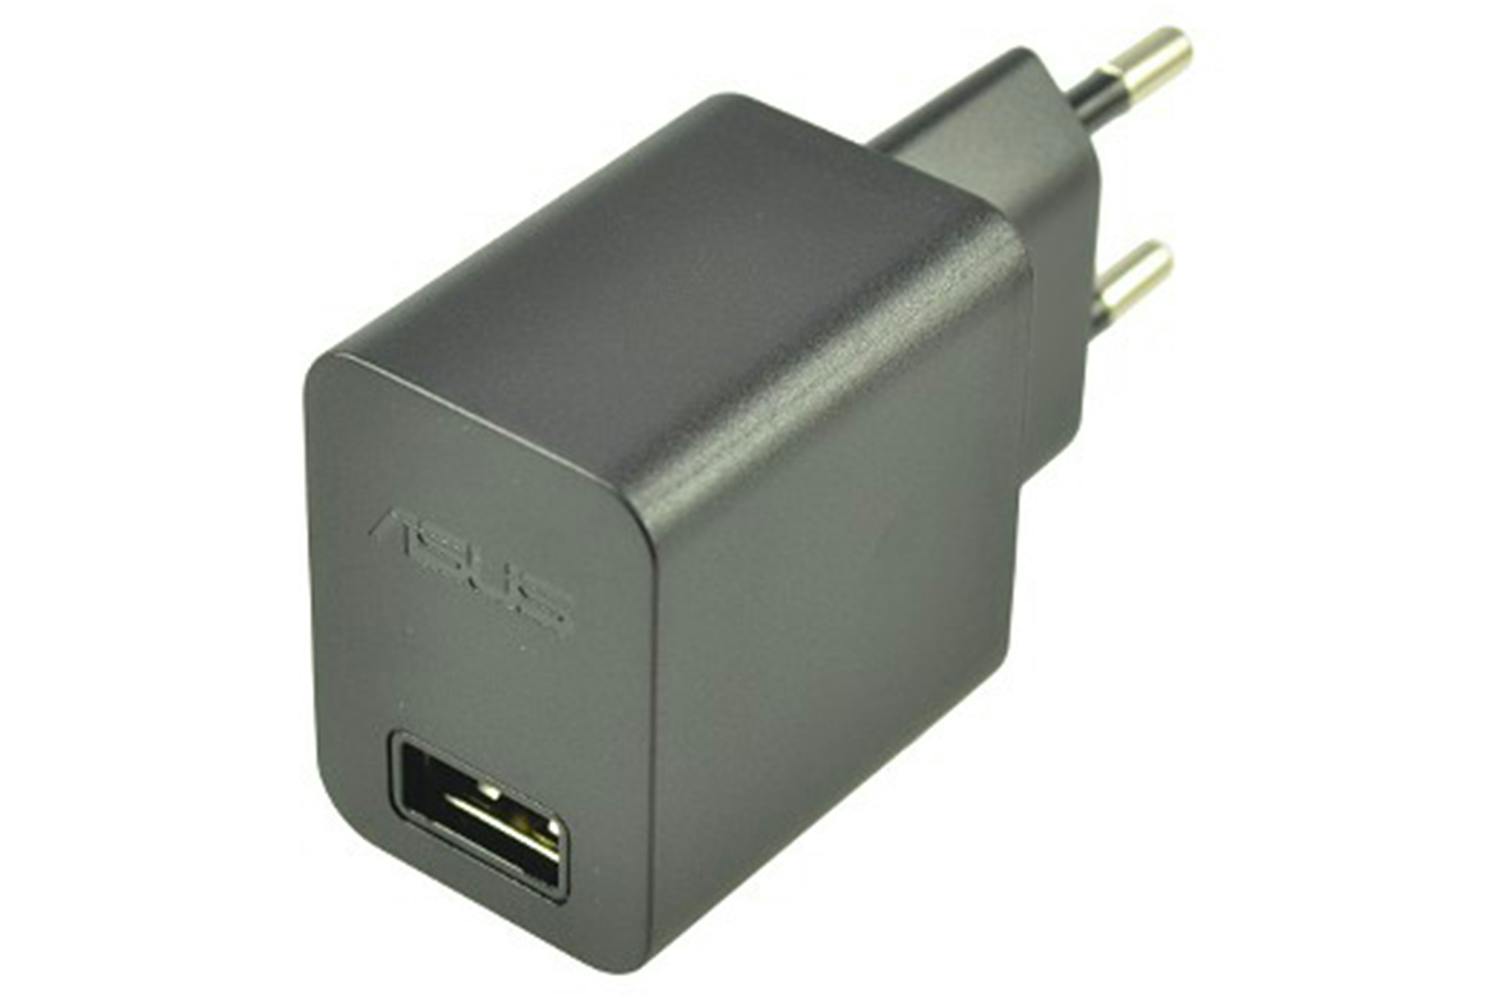 Asus Charger 5.2V 1.4 A 7W